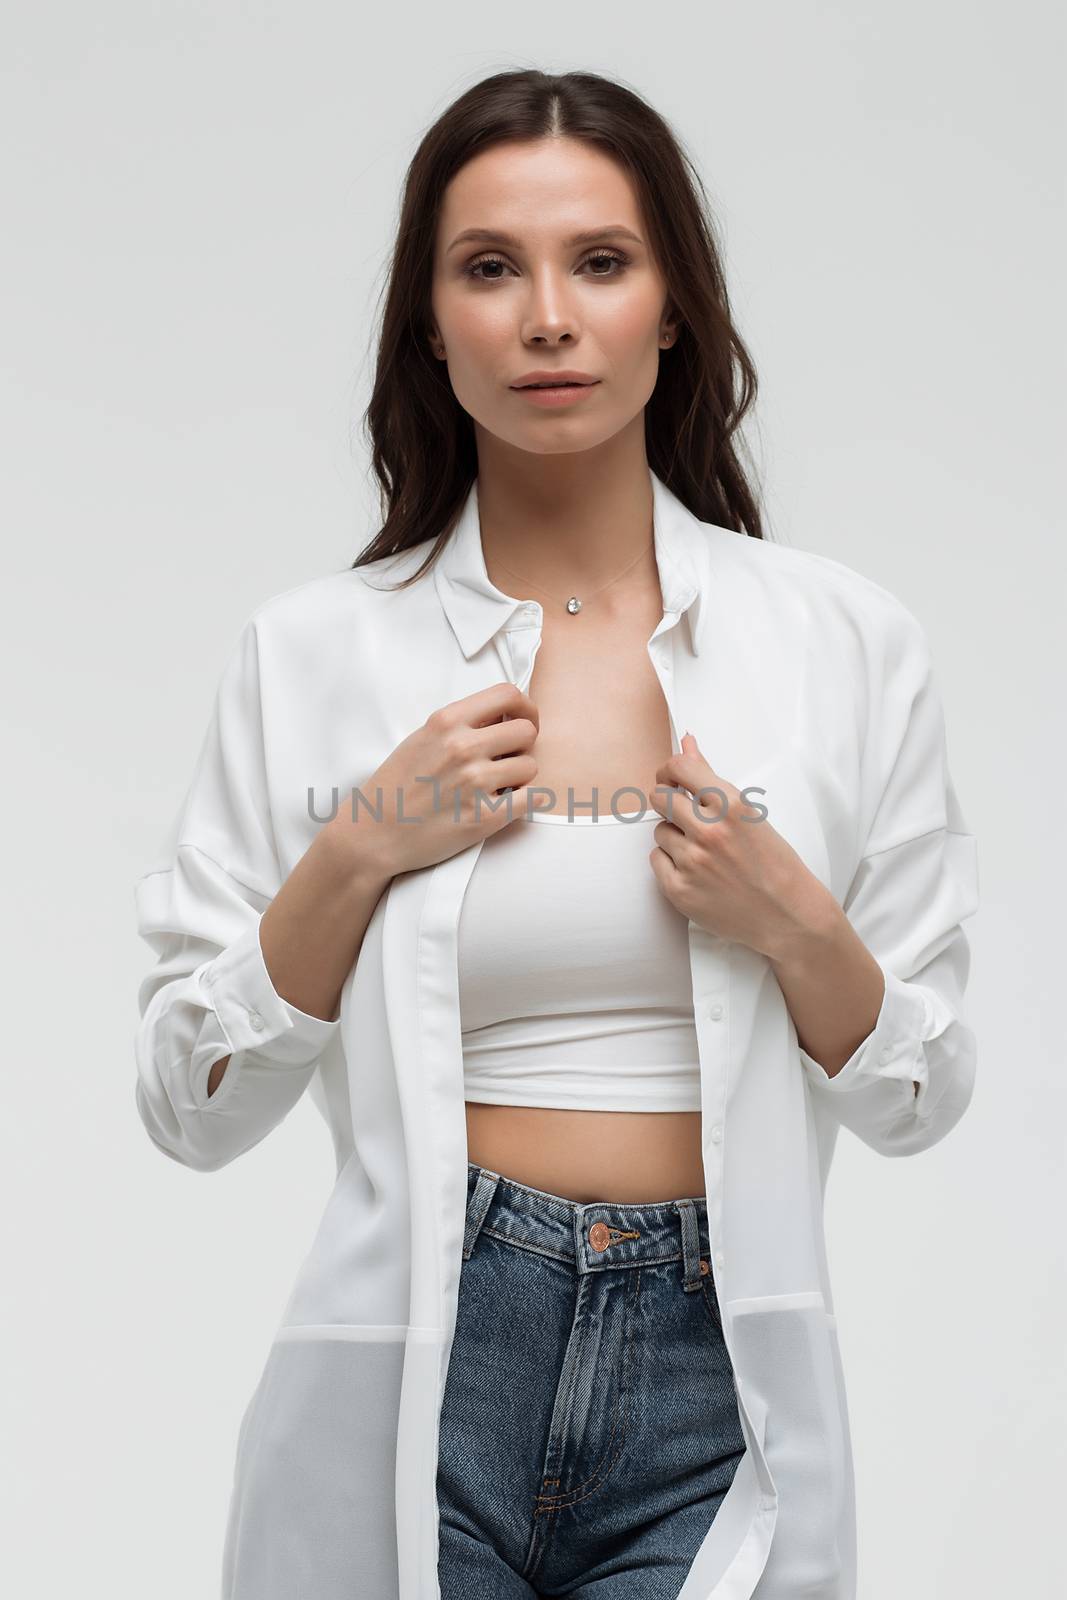 Crop confident long haired woman in white shirt and lingerie and jeans with crossed hands on white background